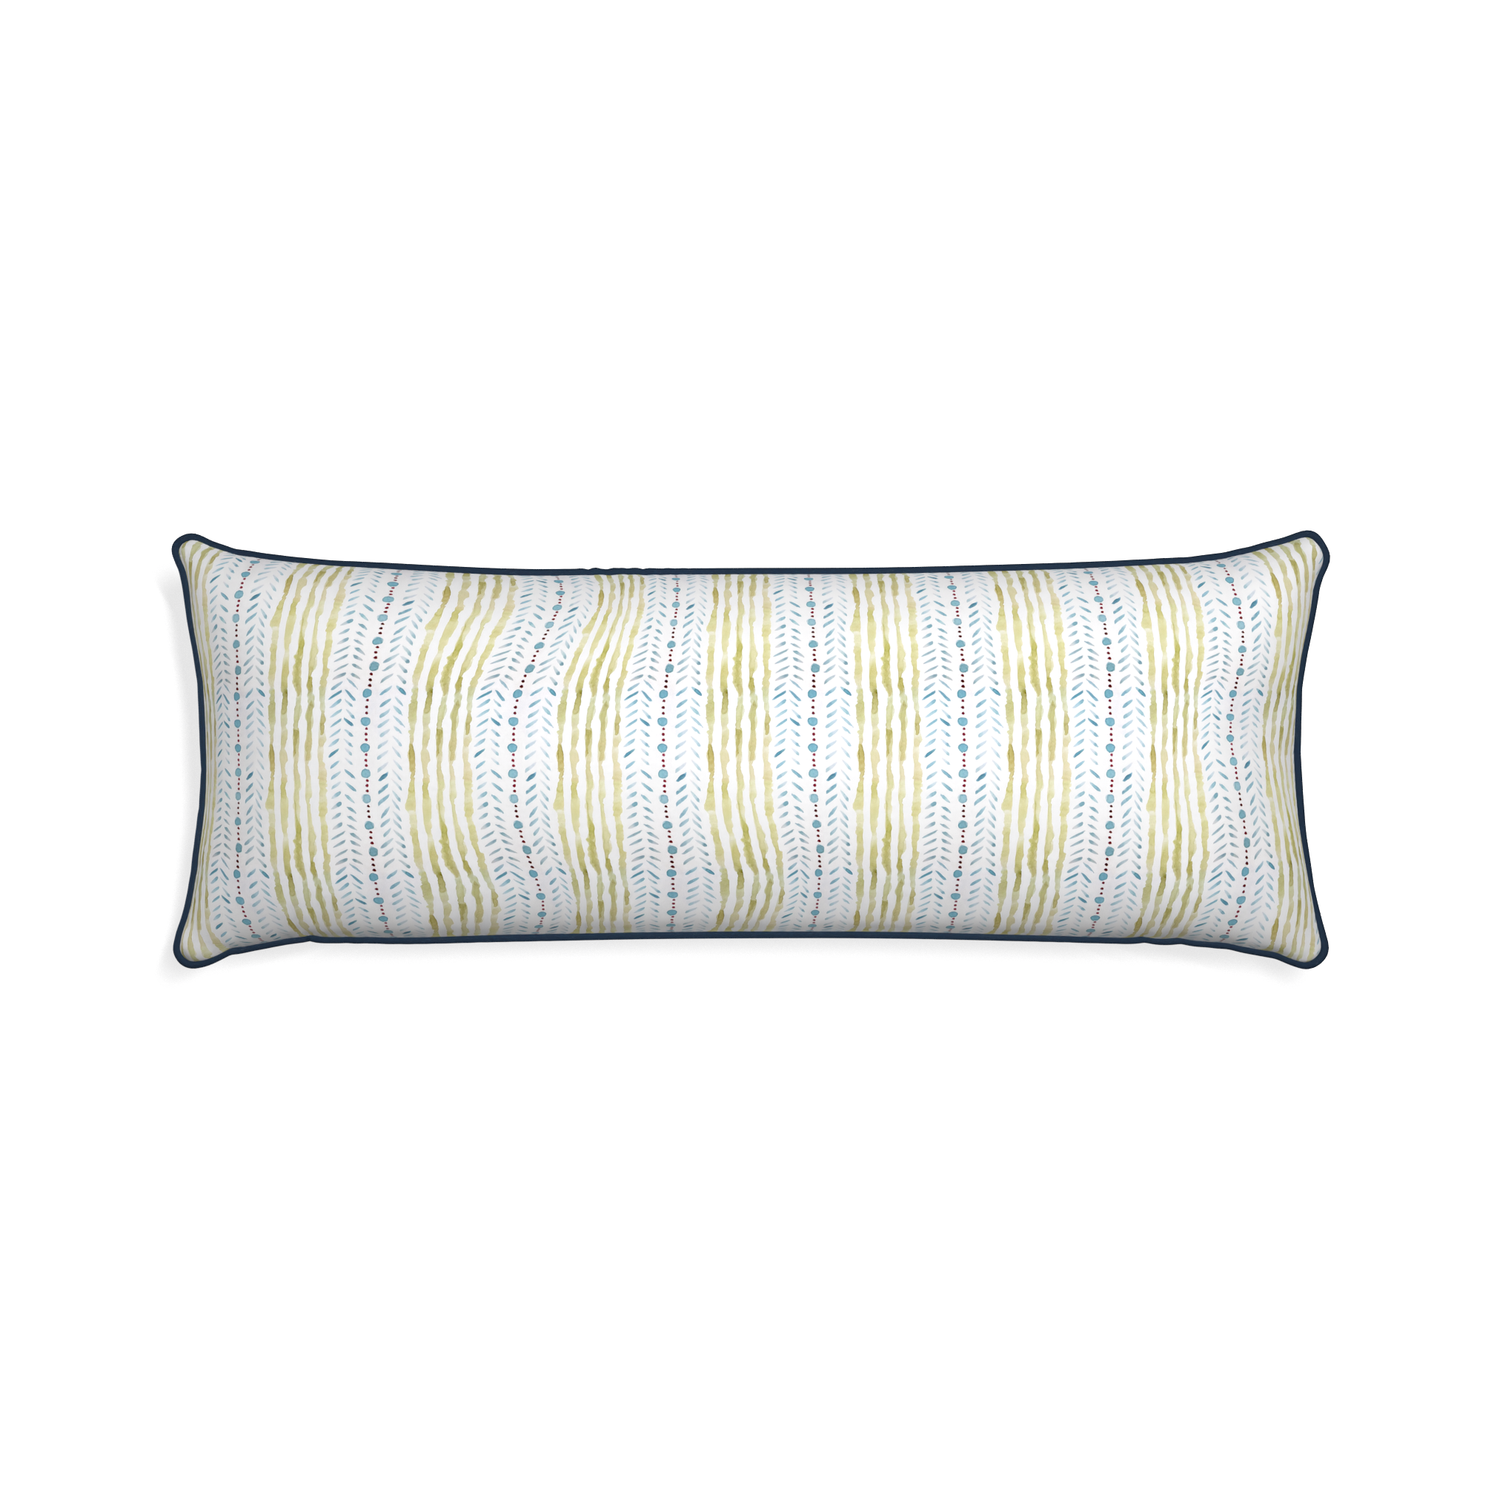 Xl-lumbar julia custom blue & green stripedpillow with c piping on white background